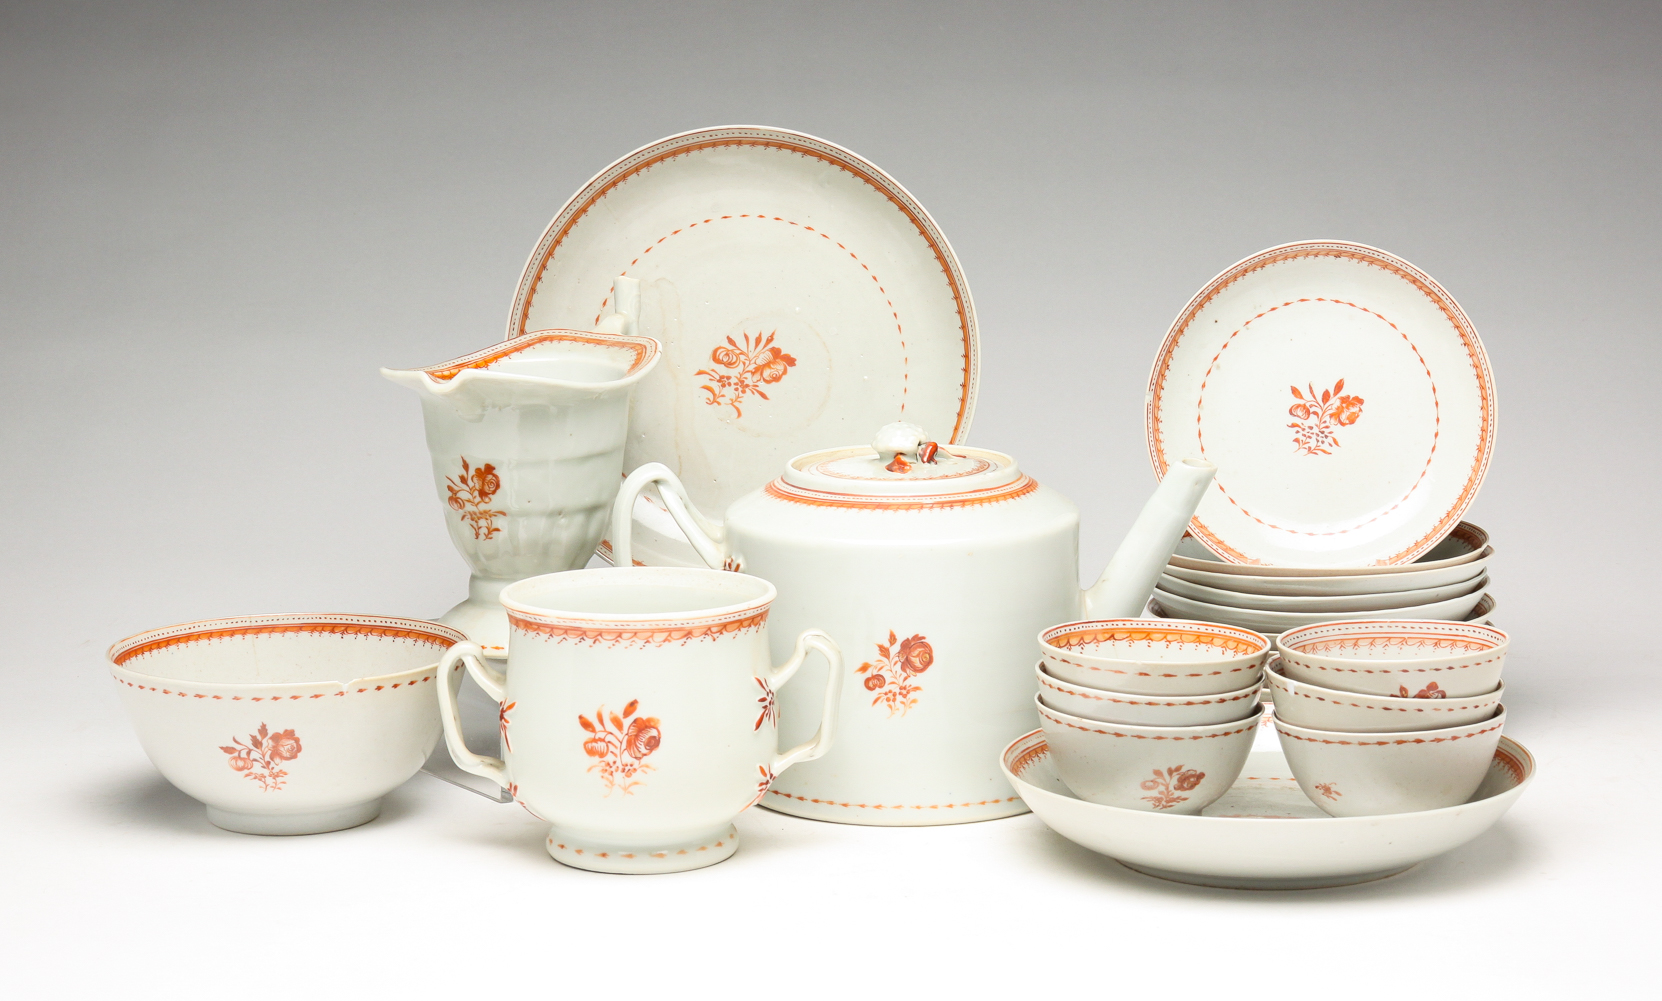 CHINESE EXPORT TEA SET. Early 19th